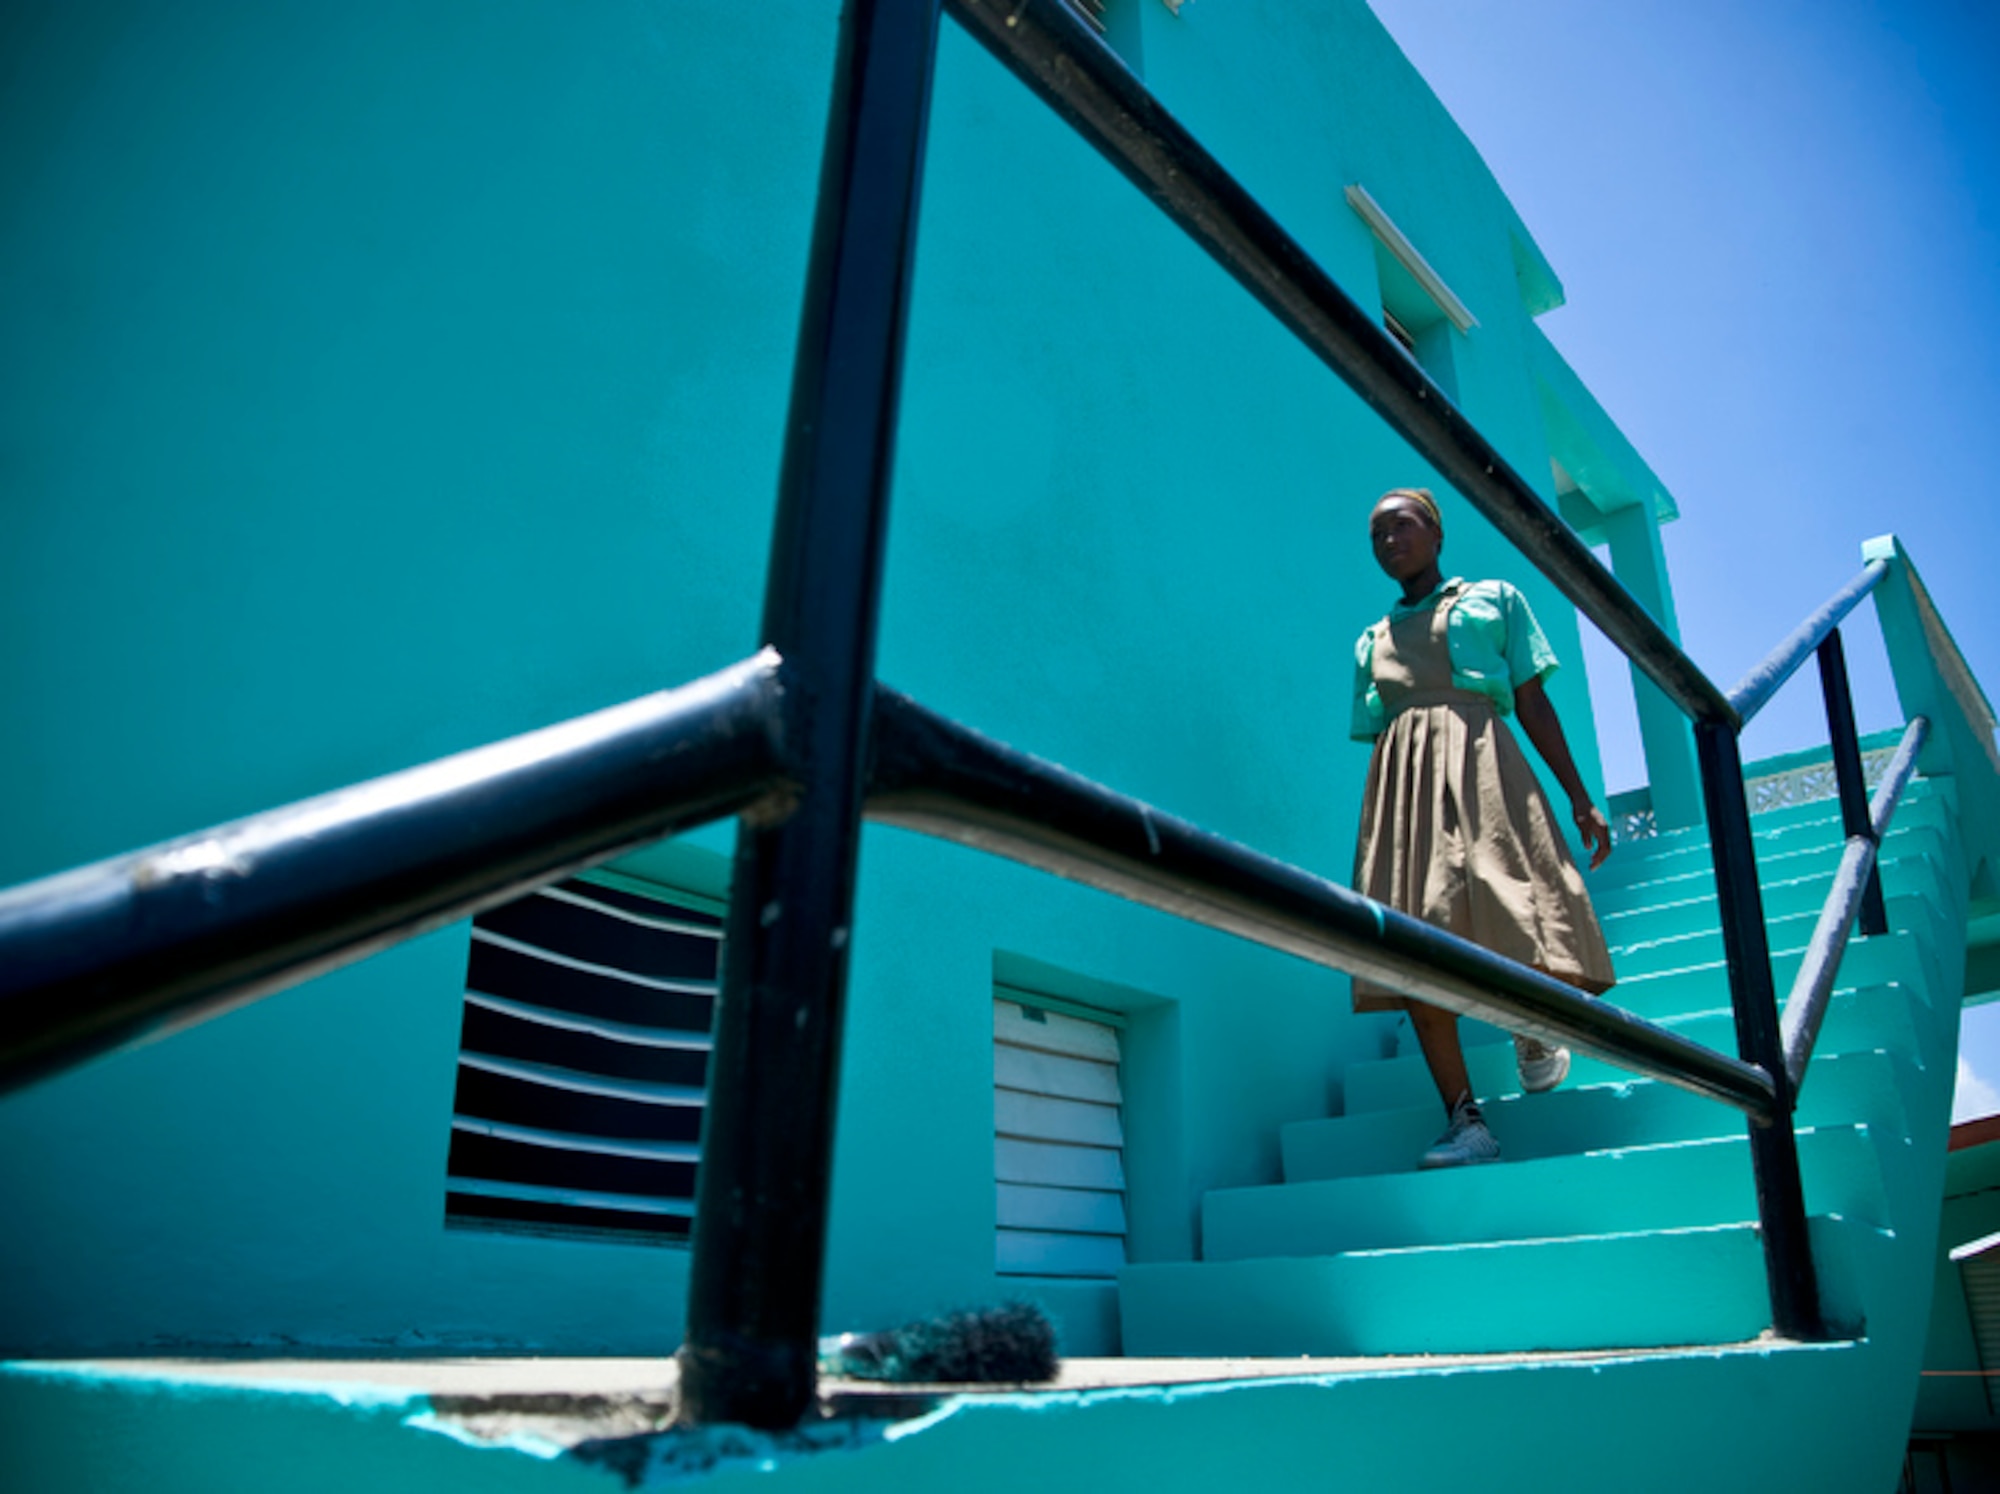 A young school girl makes her way down freshly painted stairwell at the Stella Maris School for the Physically Disabled June 8 in Belize City, Belize. Airmen deployed here for Operation Southern Partner spent the day painting the school exterior. (U.S. Air Force photo/Staff Sgt. Bennie J. Davis III)